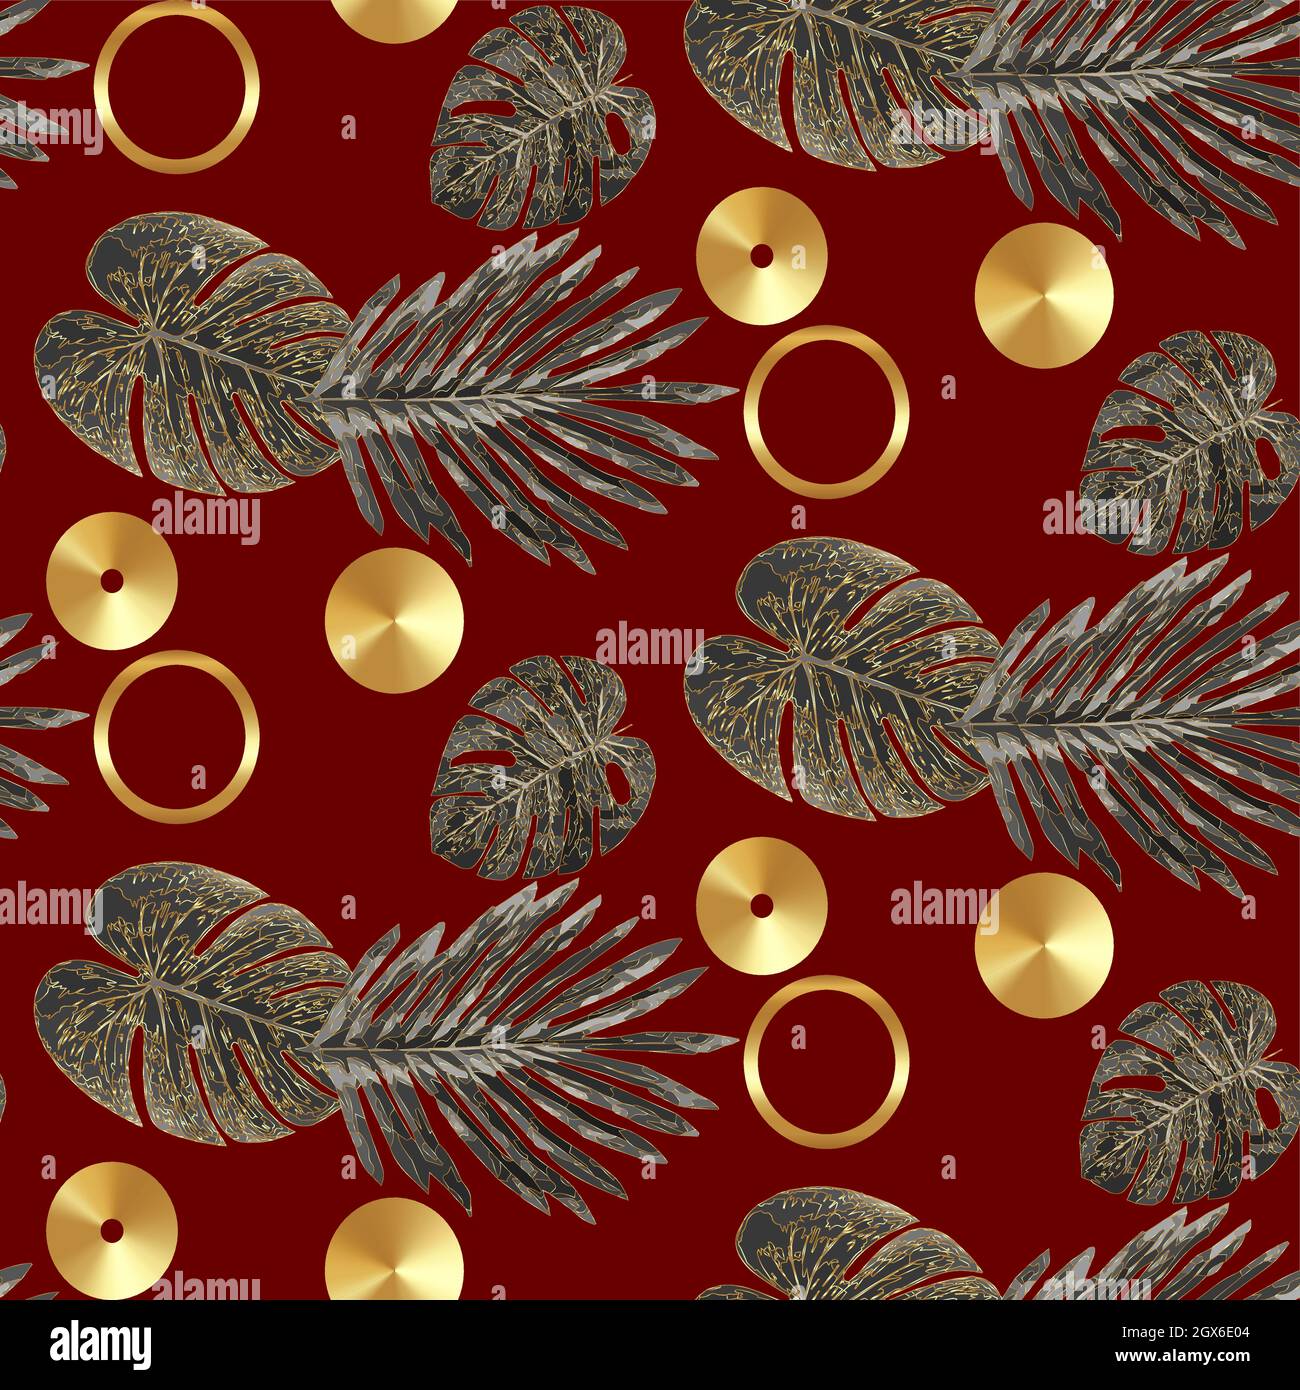 Luxury gold and black tropical plant seamless background vector. Floral pattern with golden tropical palm, monstera leaf, exotic plant, Jungle plants, Stock Vector